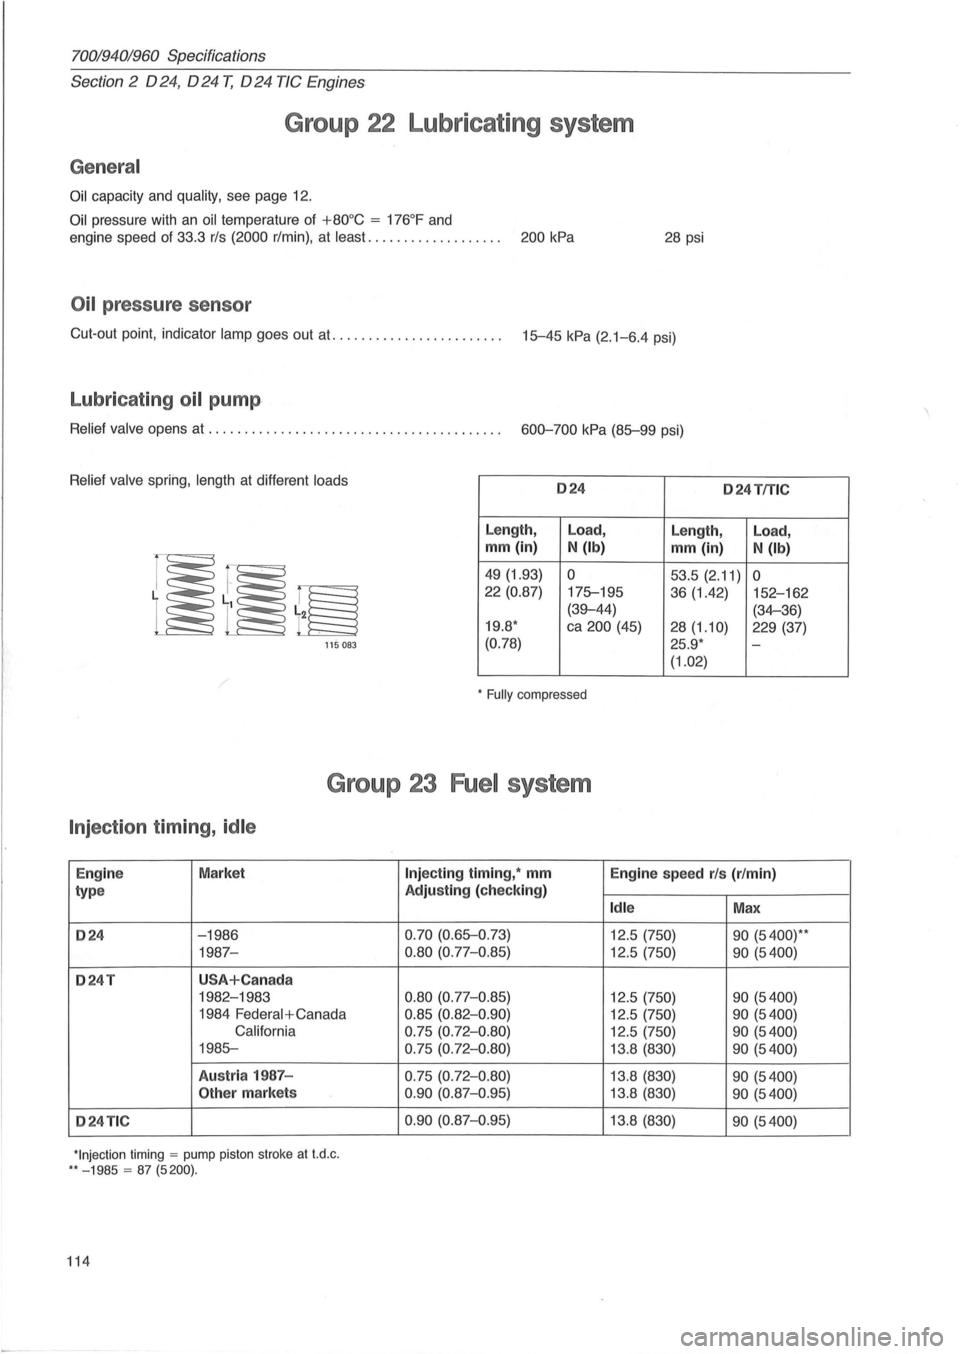 VOLVO 960 1982  Service Repair Manual 70019401960 Specifications 
Section 2 024, 024 T, 024 TIC Engines 
Group  22 Lubricating  system 
General 
Oil capacity  and quality, see page 12. 
Oil pressure  with an oil temperature  of +80°C = 1